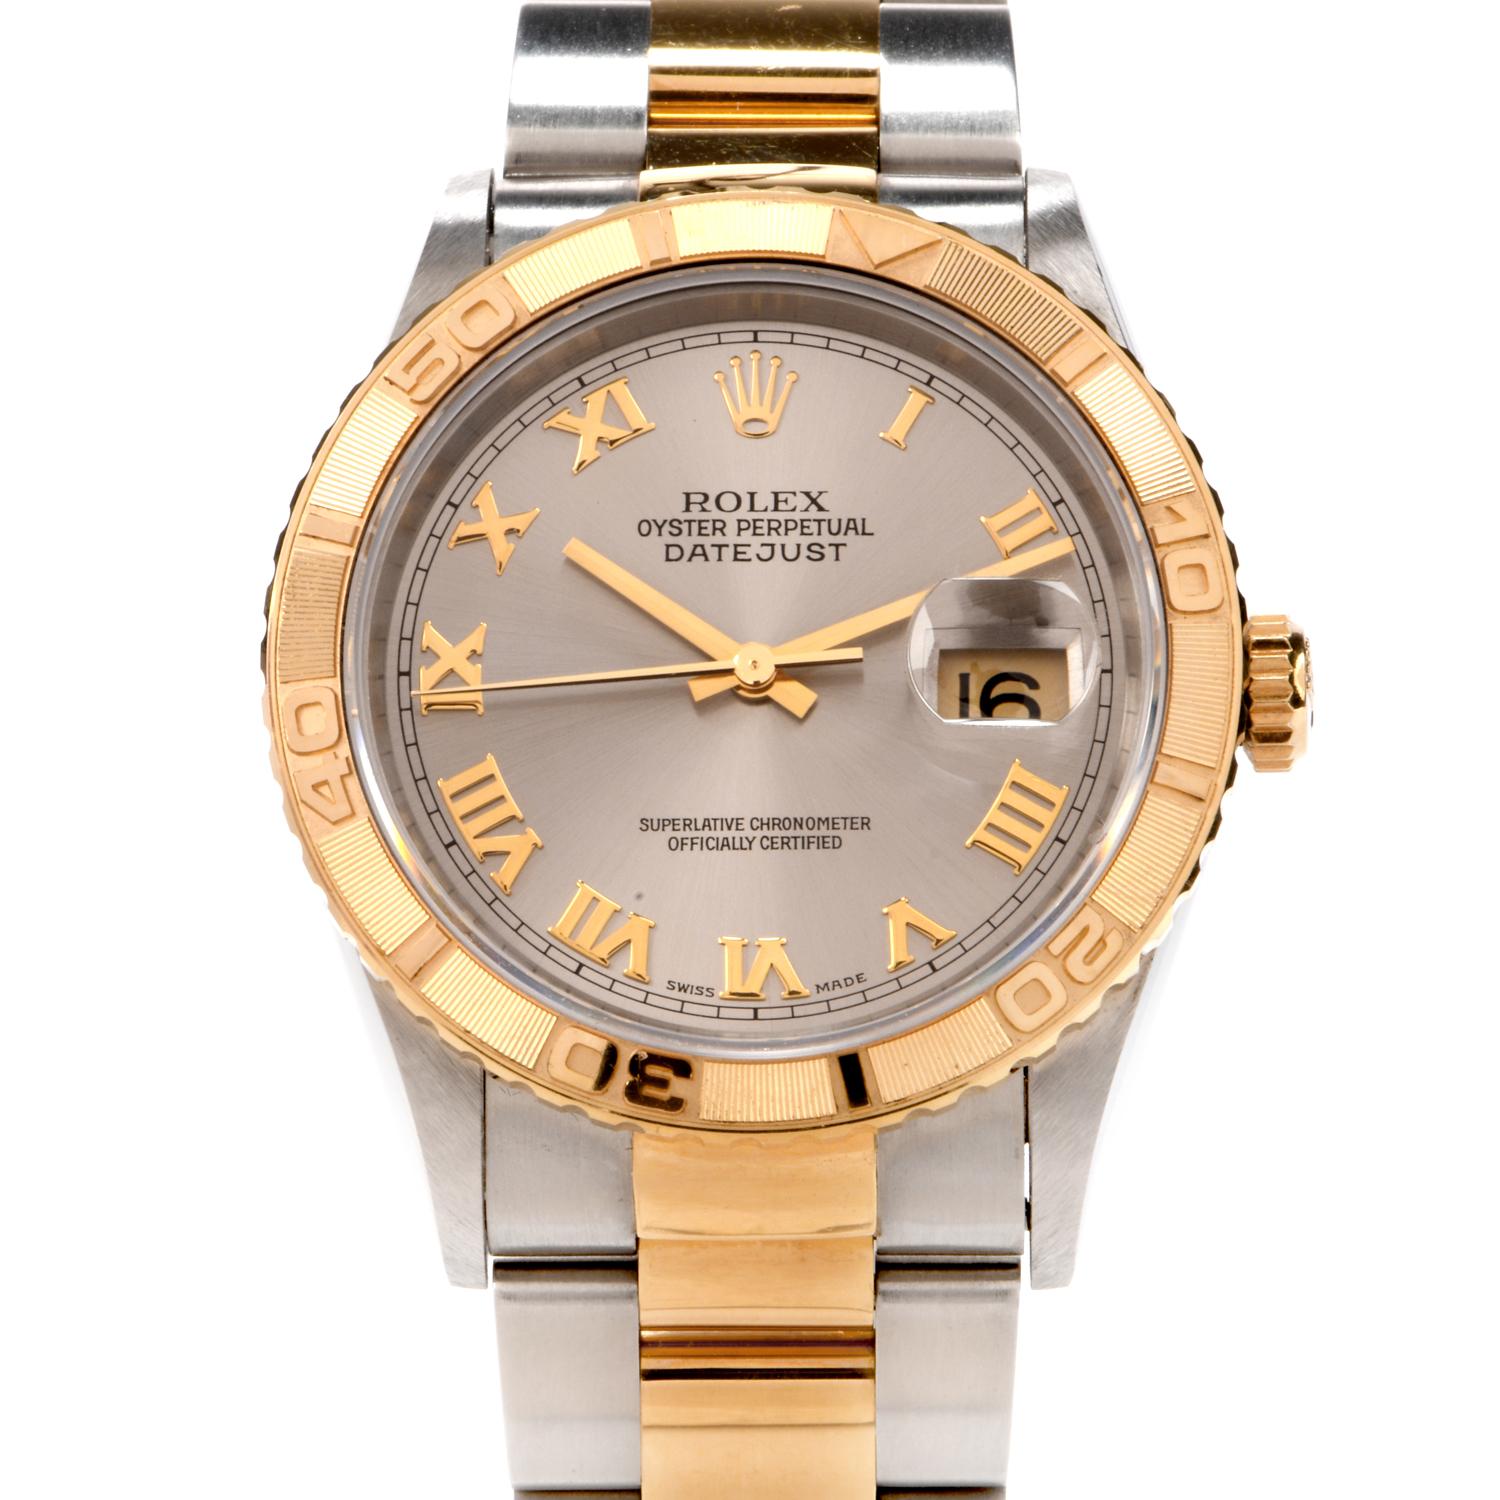 Feel the prestige in wearing this preowned unisex 36mm Stainless Steel

and 18K yellow gold Rolex Oyster Perpetual Datejust Watch.

Featuring a 1 jewel automatic movement, this watch has a Sapphire

scratch resistant crystal and is water resistant